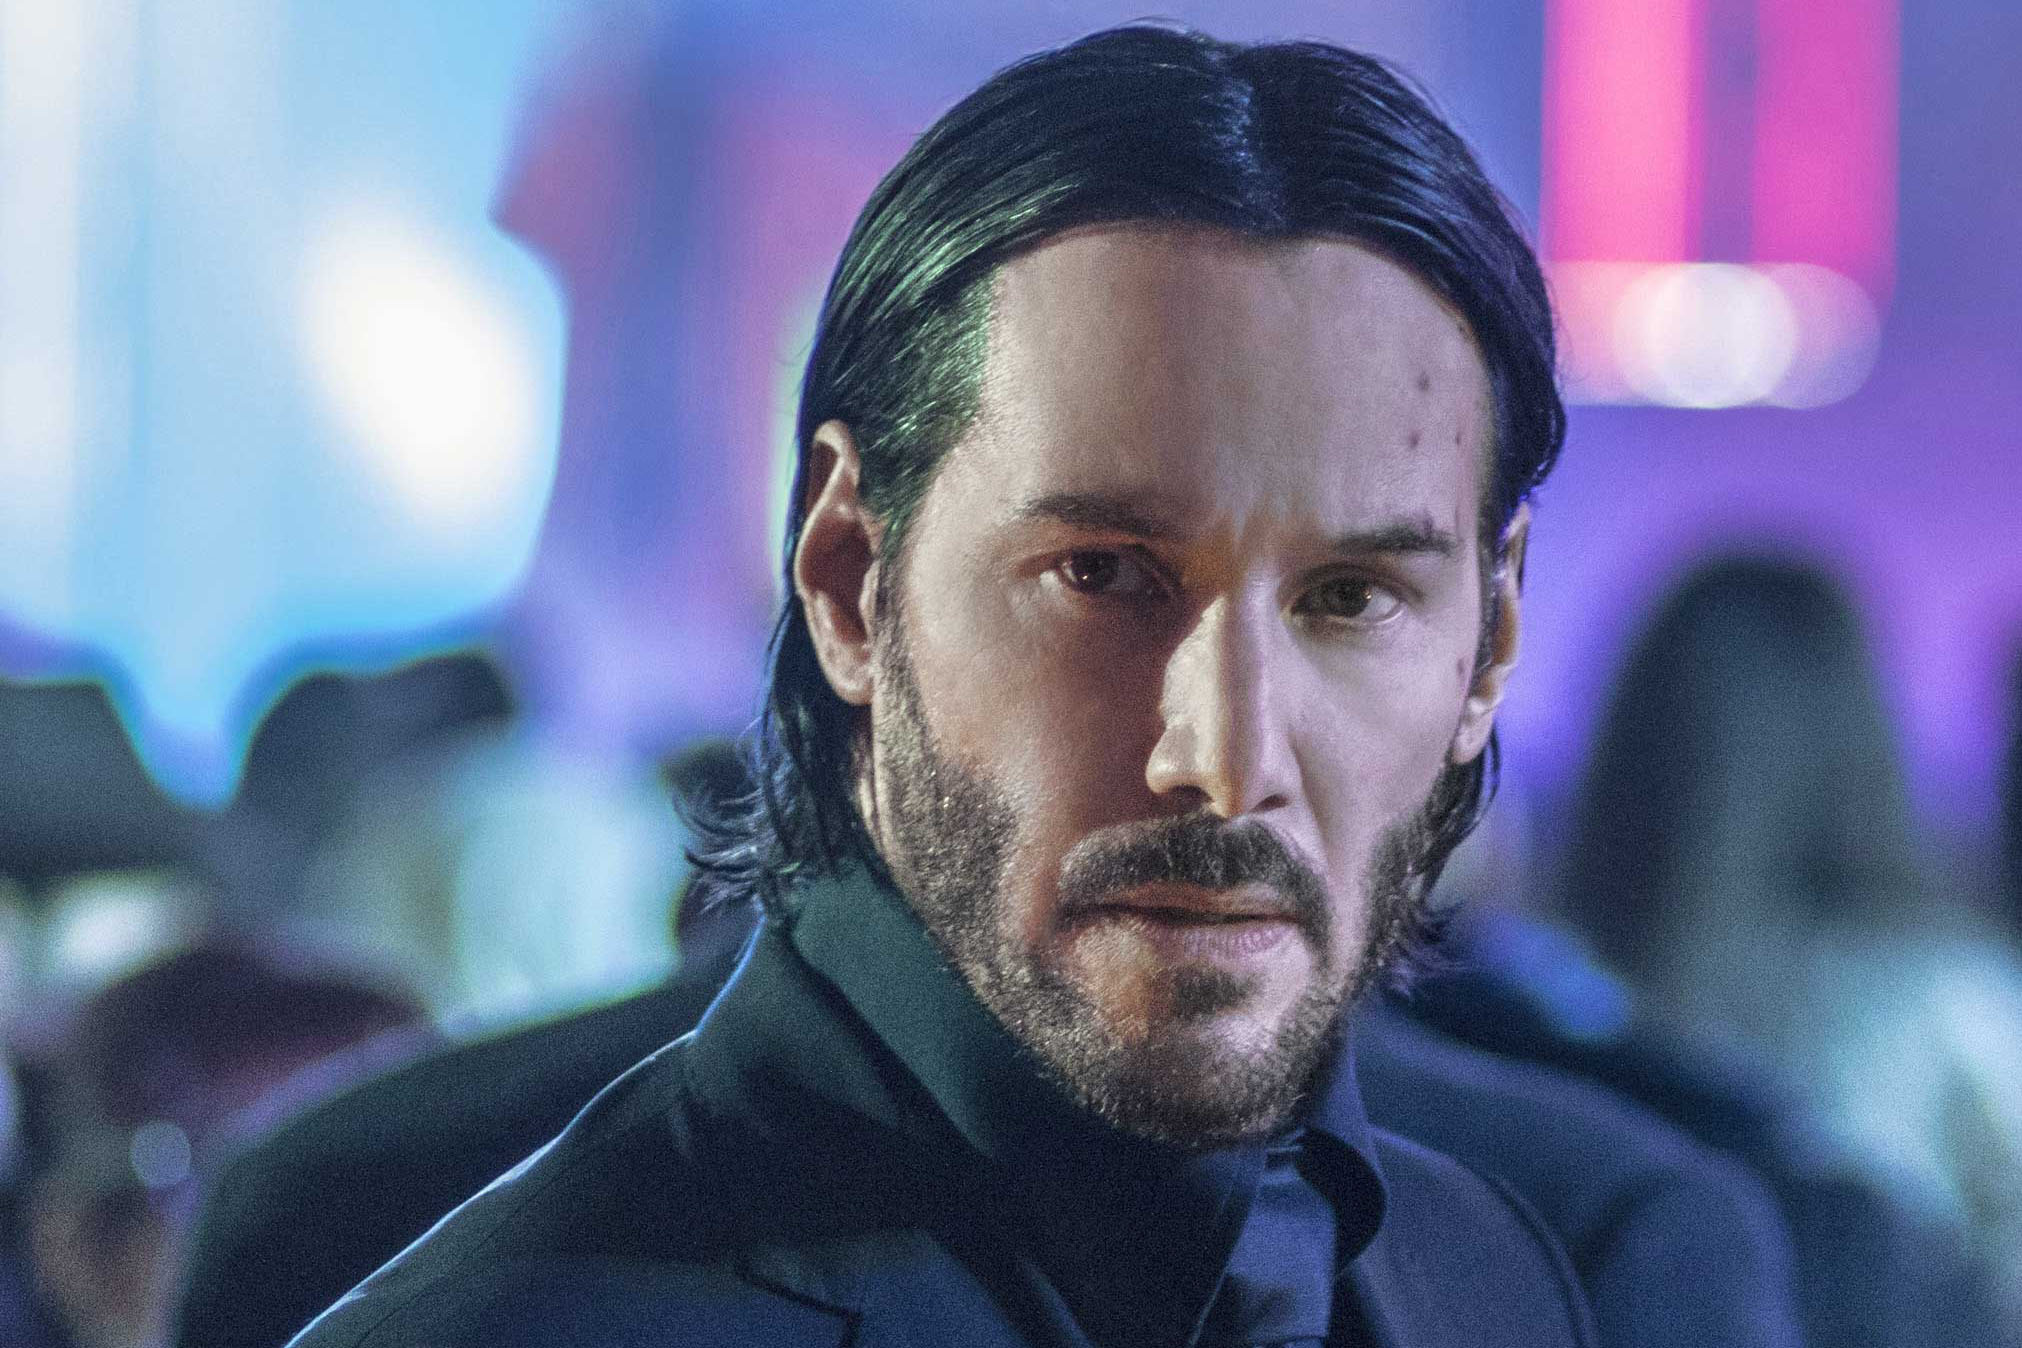 In Chapter 2, John Wick traveled abroad for another round of grisly vengeance (Lionsgate)